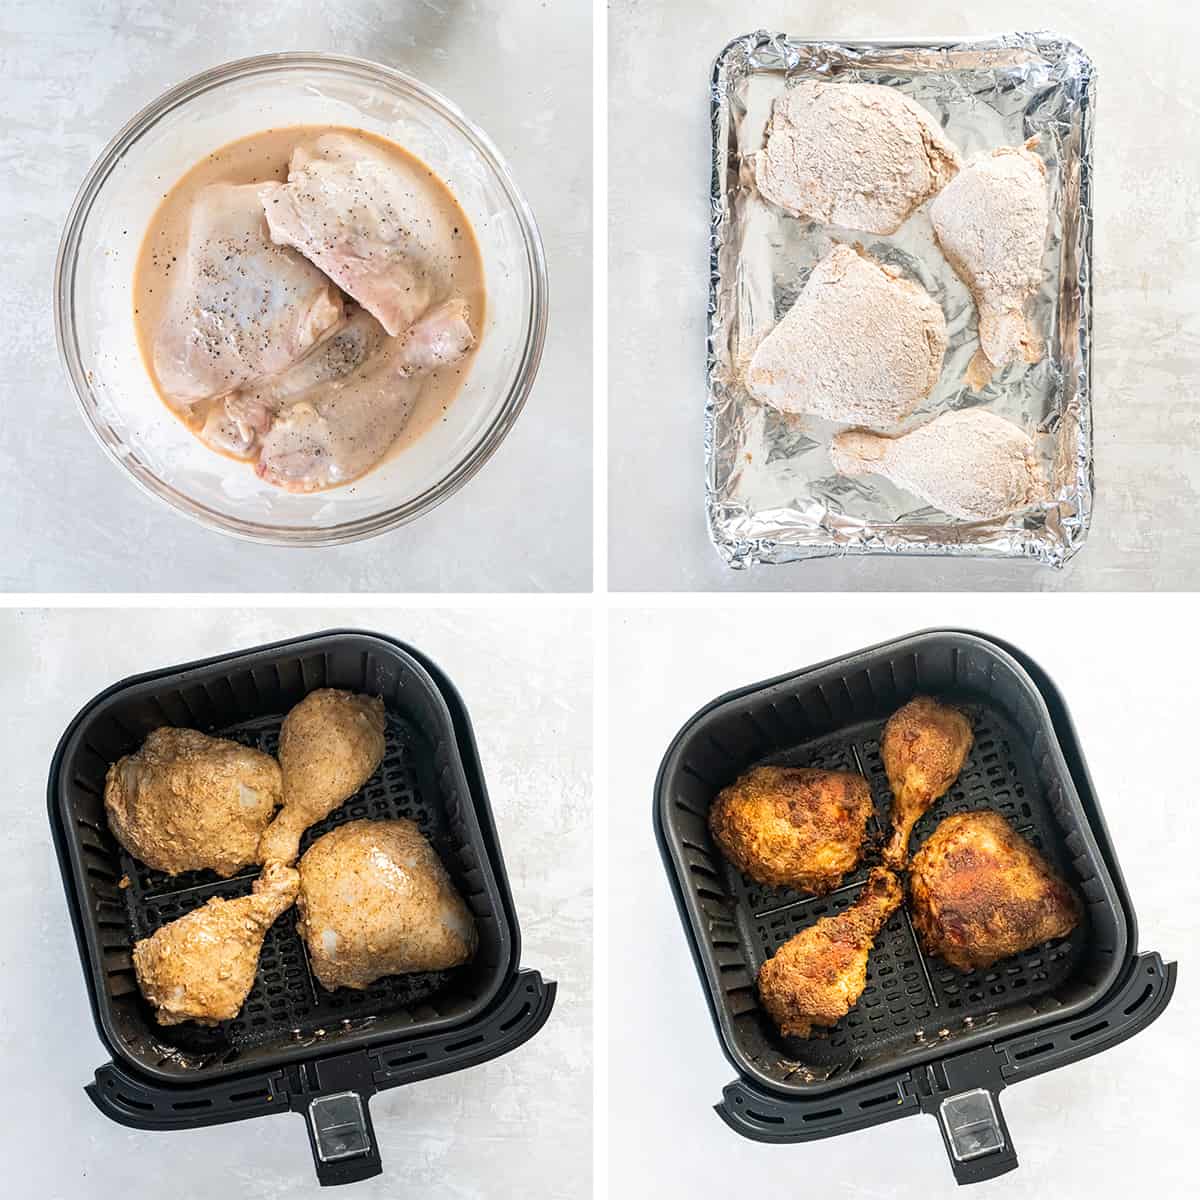 Four images showing the process for soaking, breading, and cooking fried chicken in an air fryer.